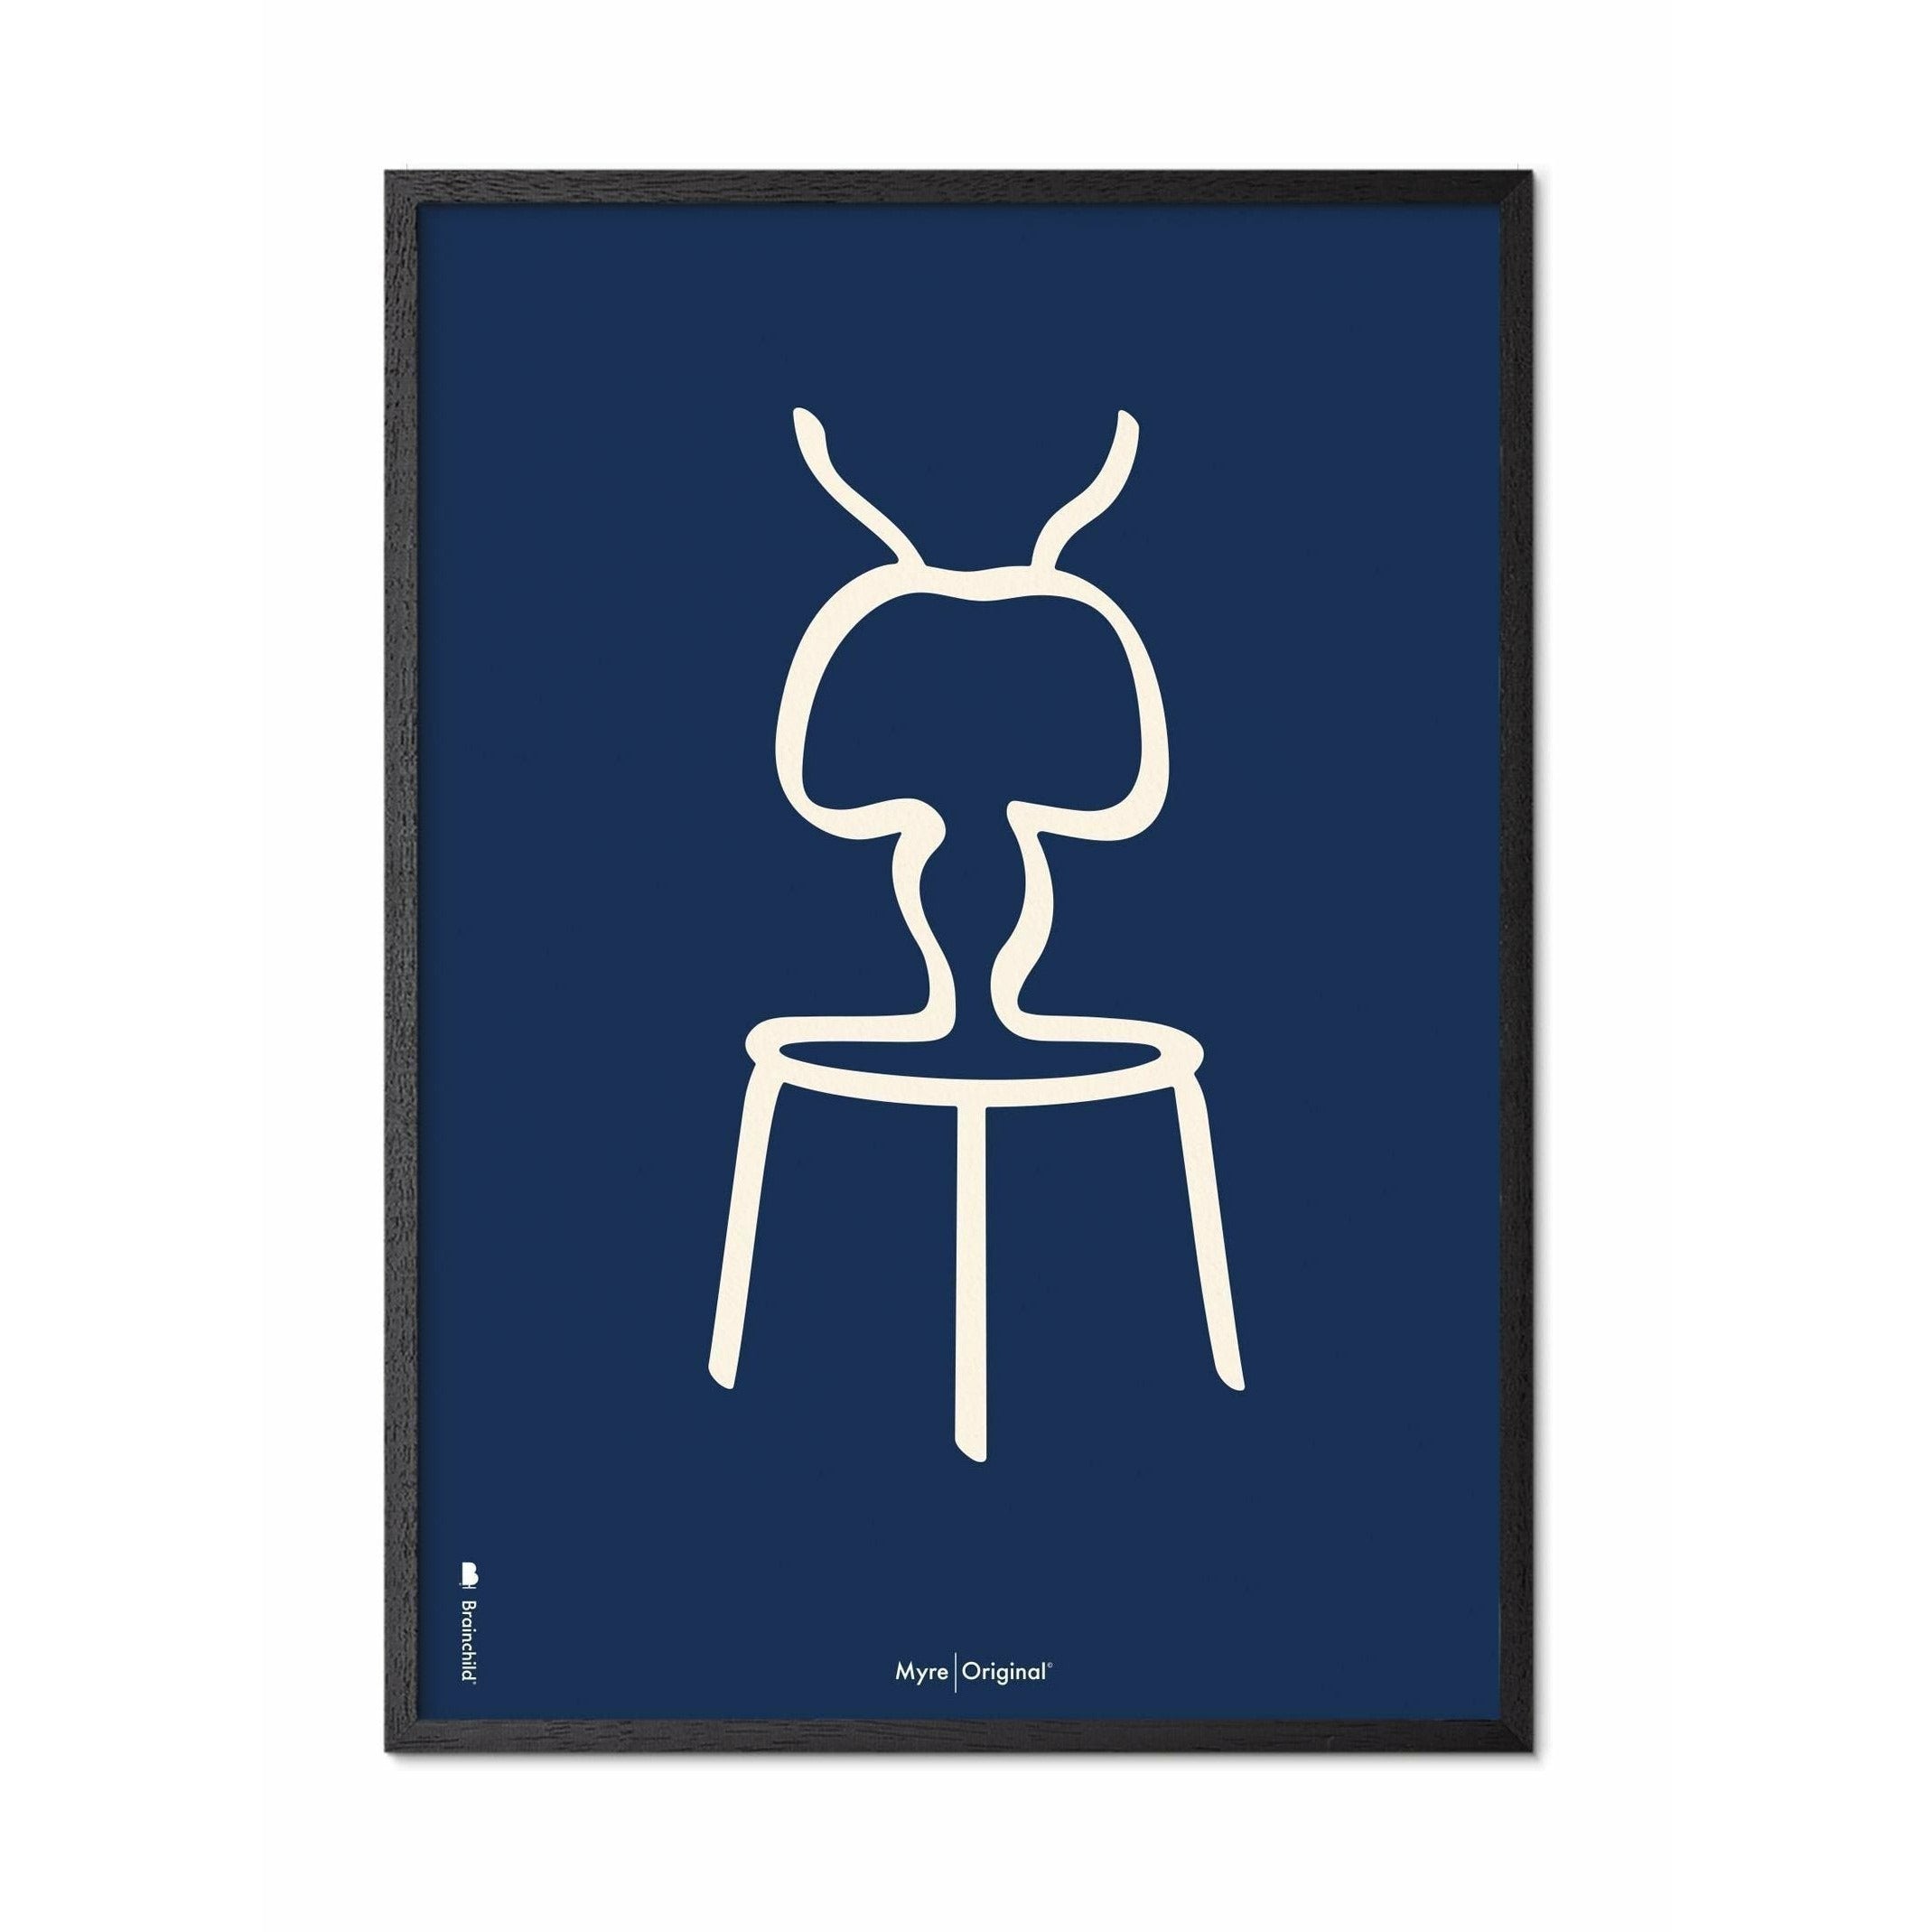 Brainchild Ant Line Poster, Frame In Black Lacquered Wood 30x40 Cm, Blue Background